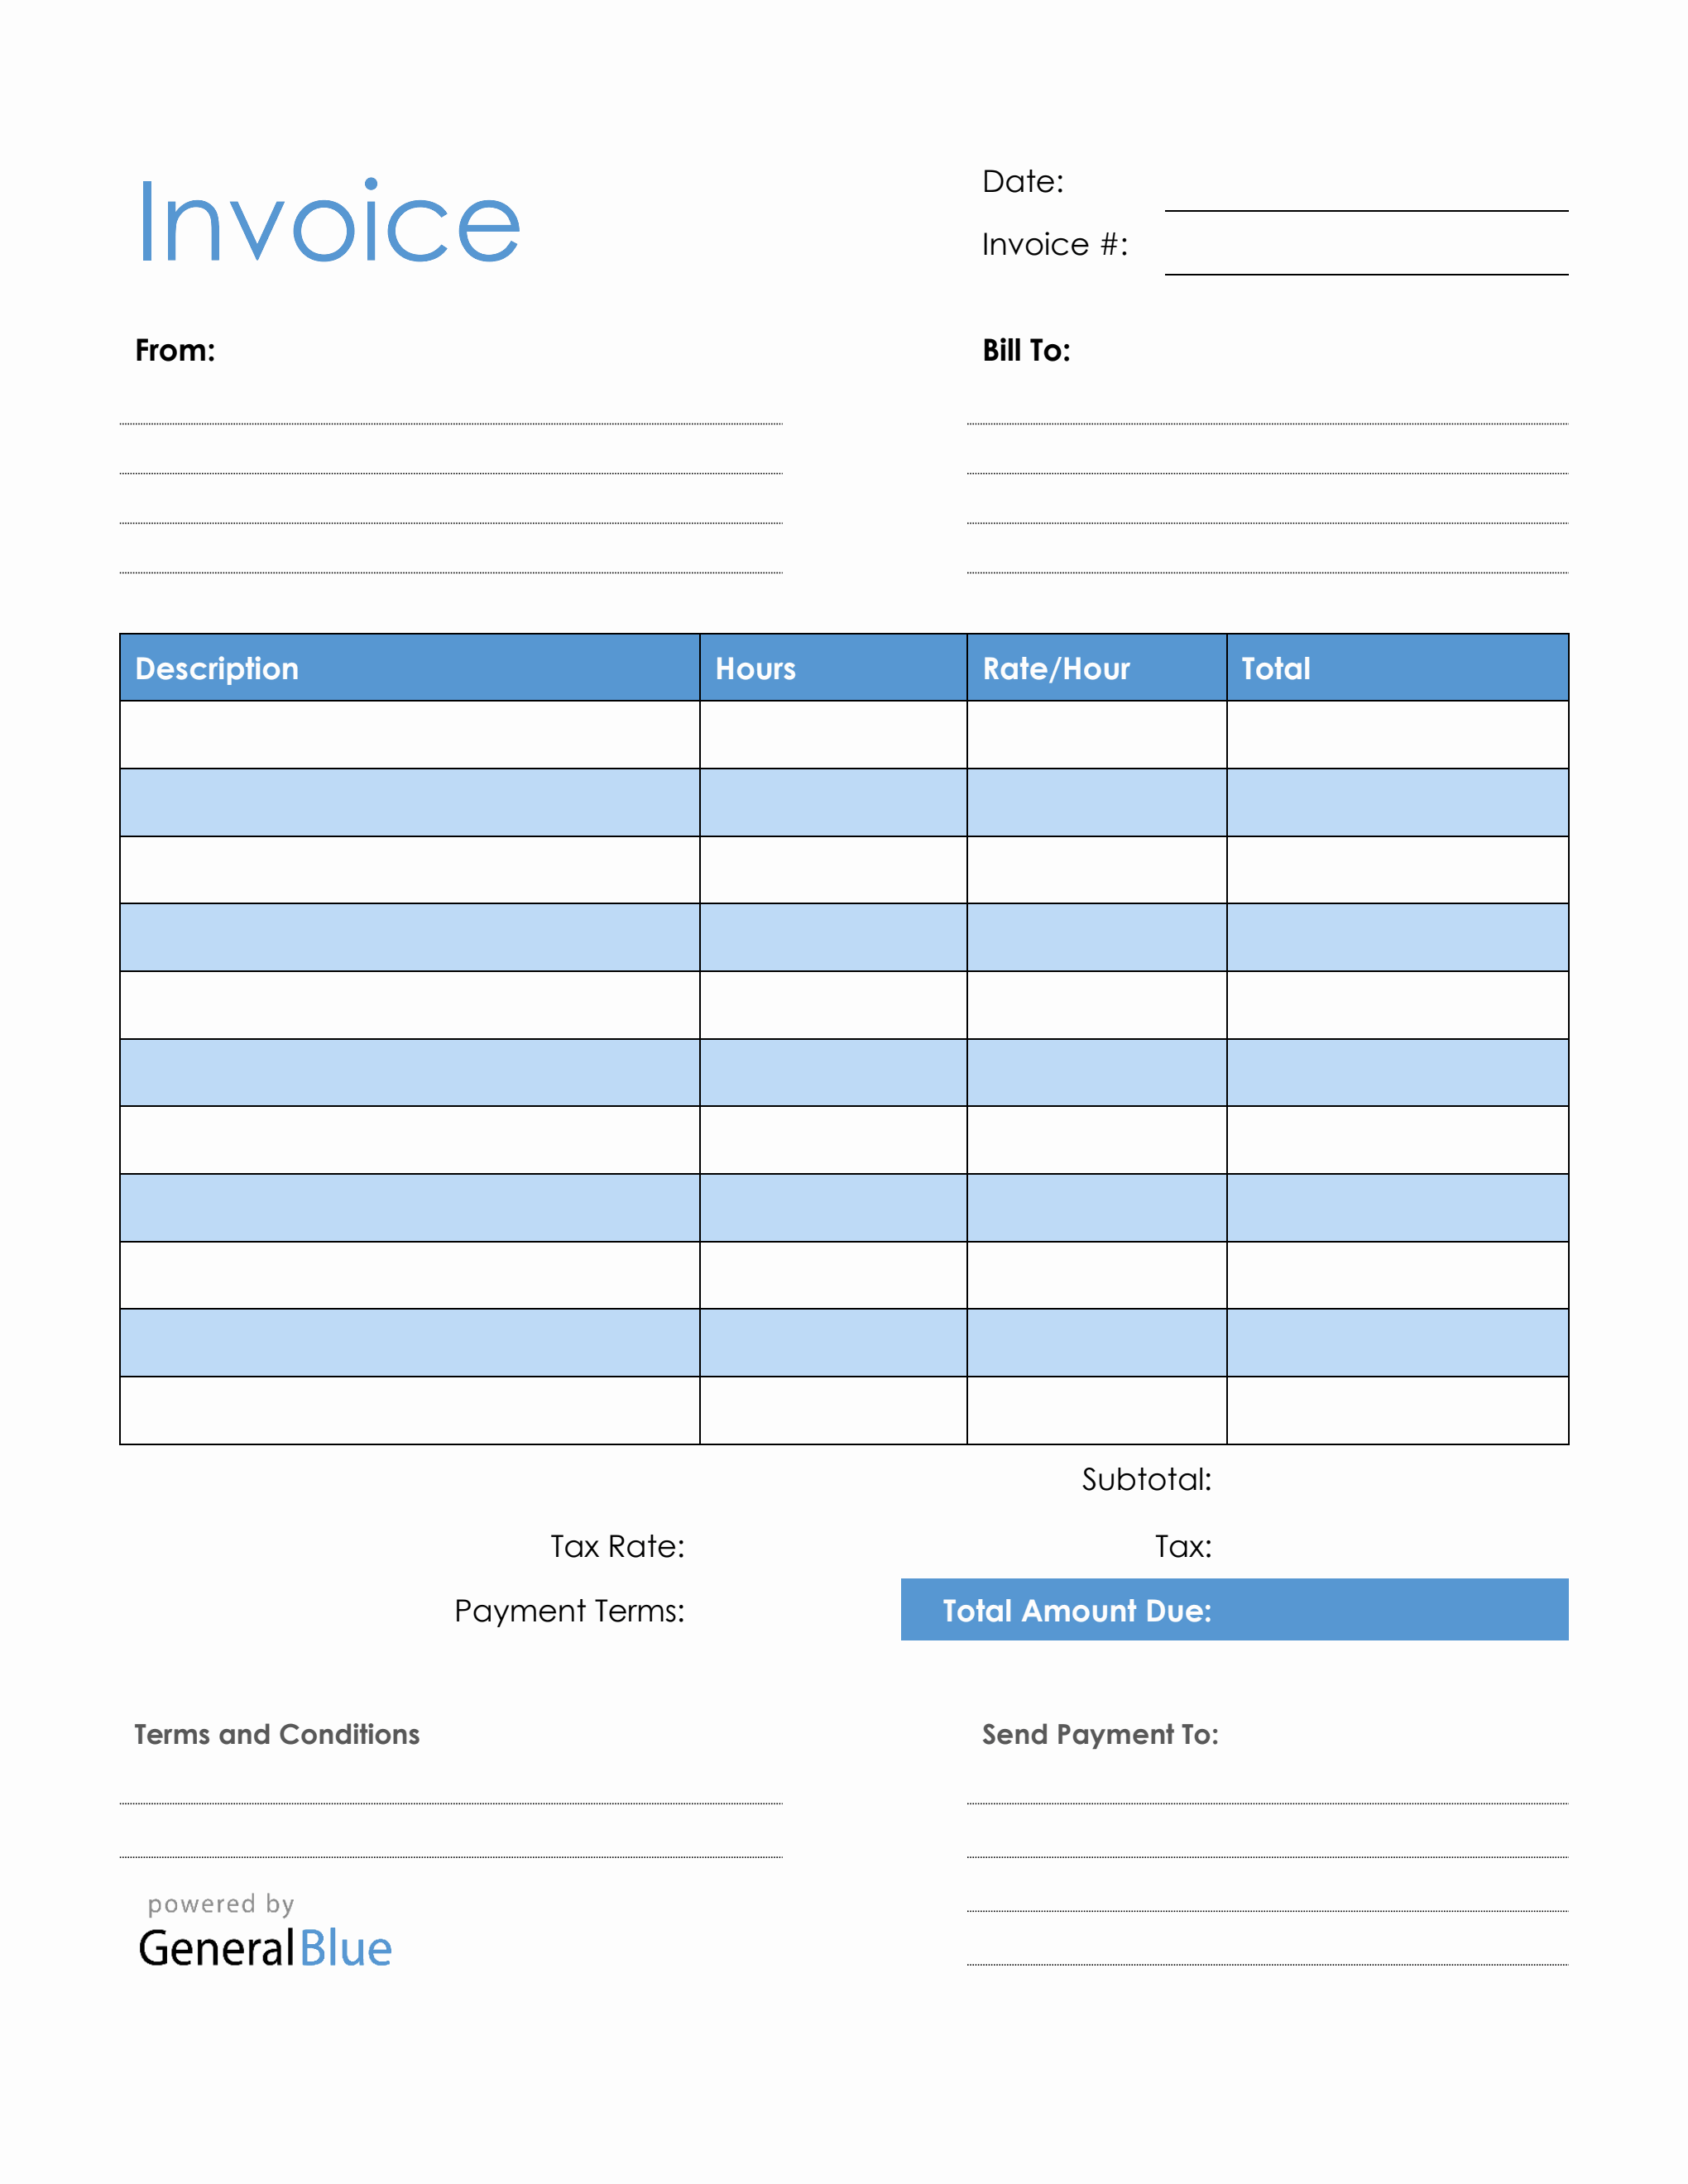 blank-invoice-template-in-word-blue